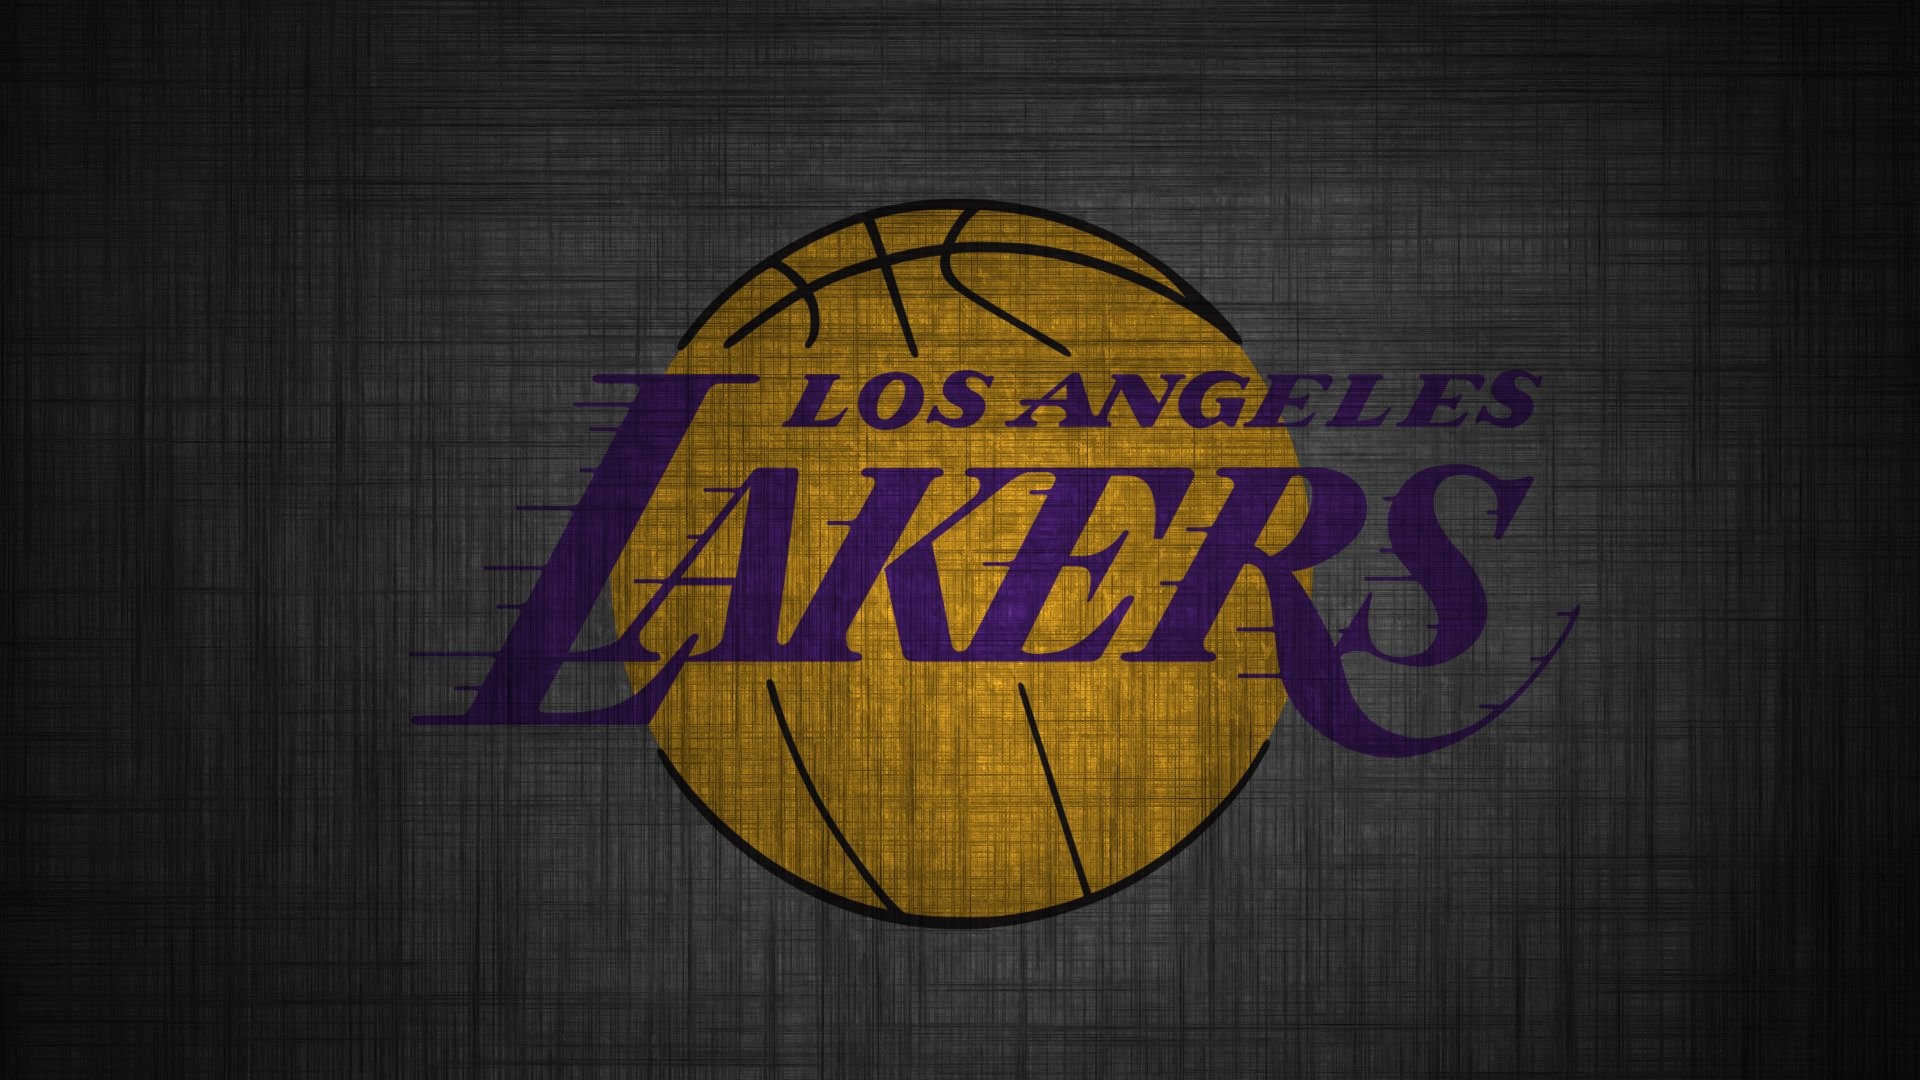 Wallpaper Kobe Bryant, los angeles lakers, legendary player images for  desktop, section спорт - download